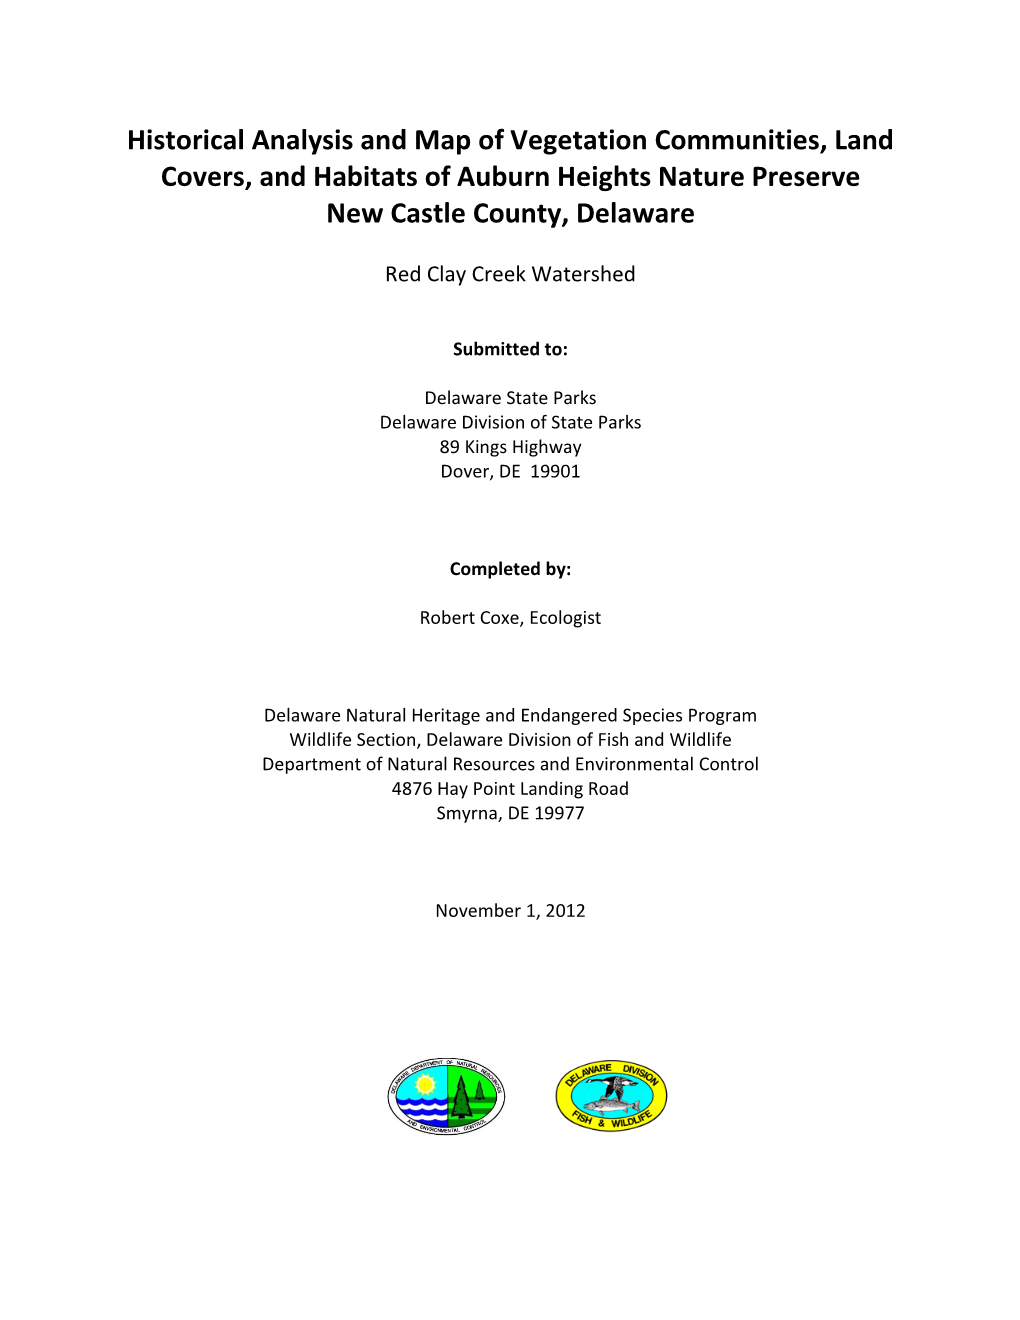 Historical Analysis and Map of Vegetation Communities, Land Covers, and Habitats of Auburn Heights Nature Preserve New Castle County, Delaware